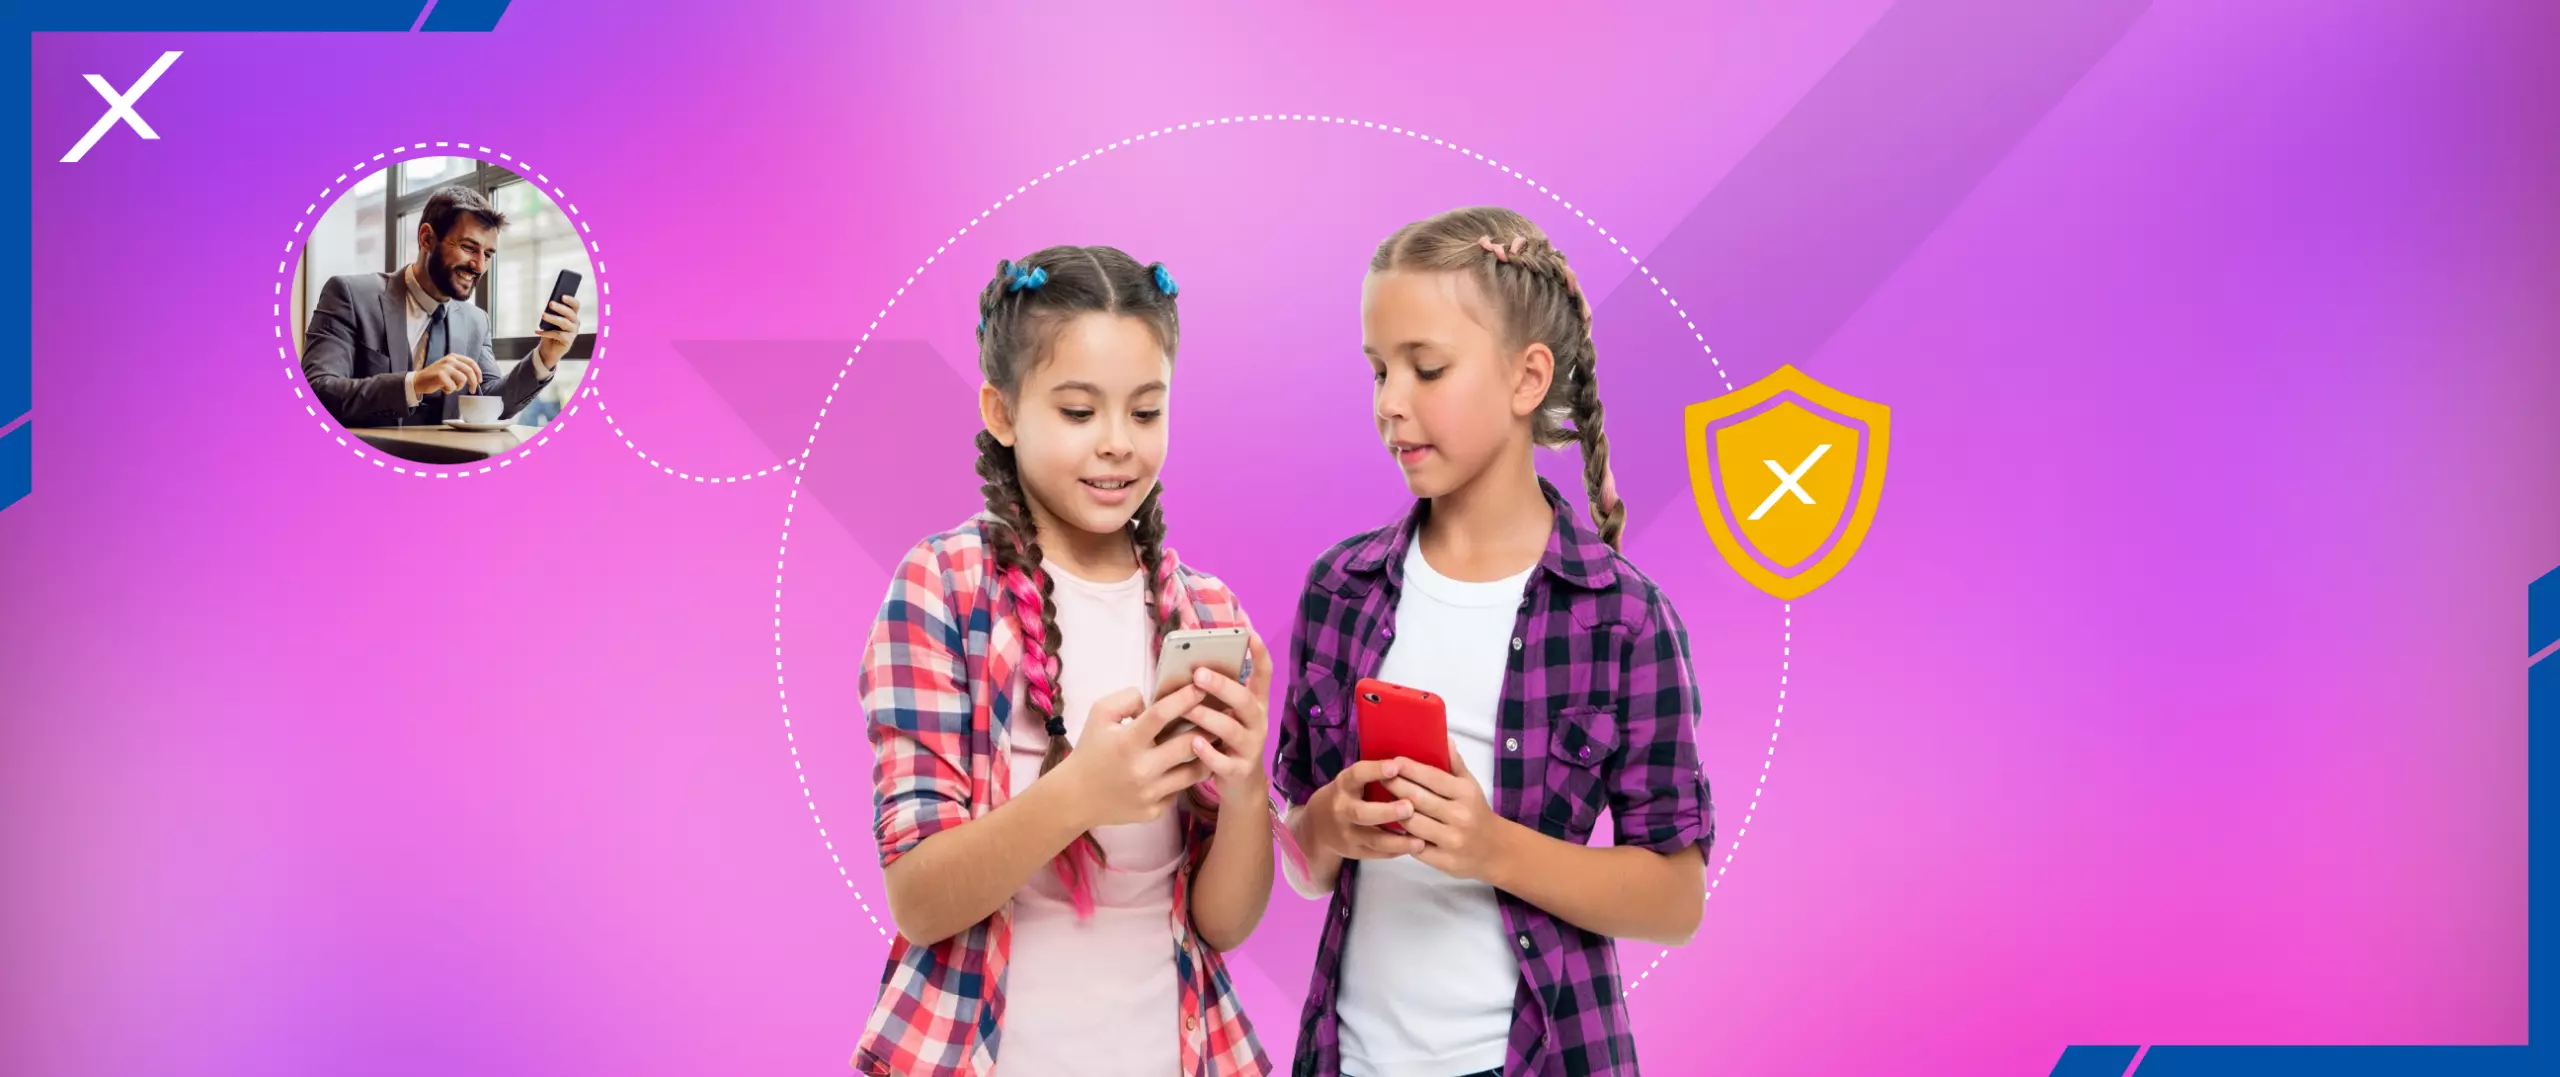  Social Media Safety for Kids with NexaSpy App